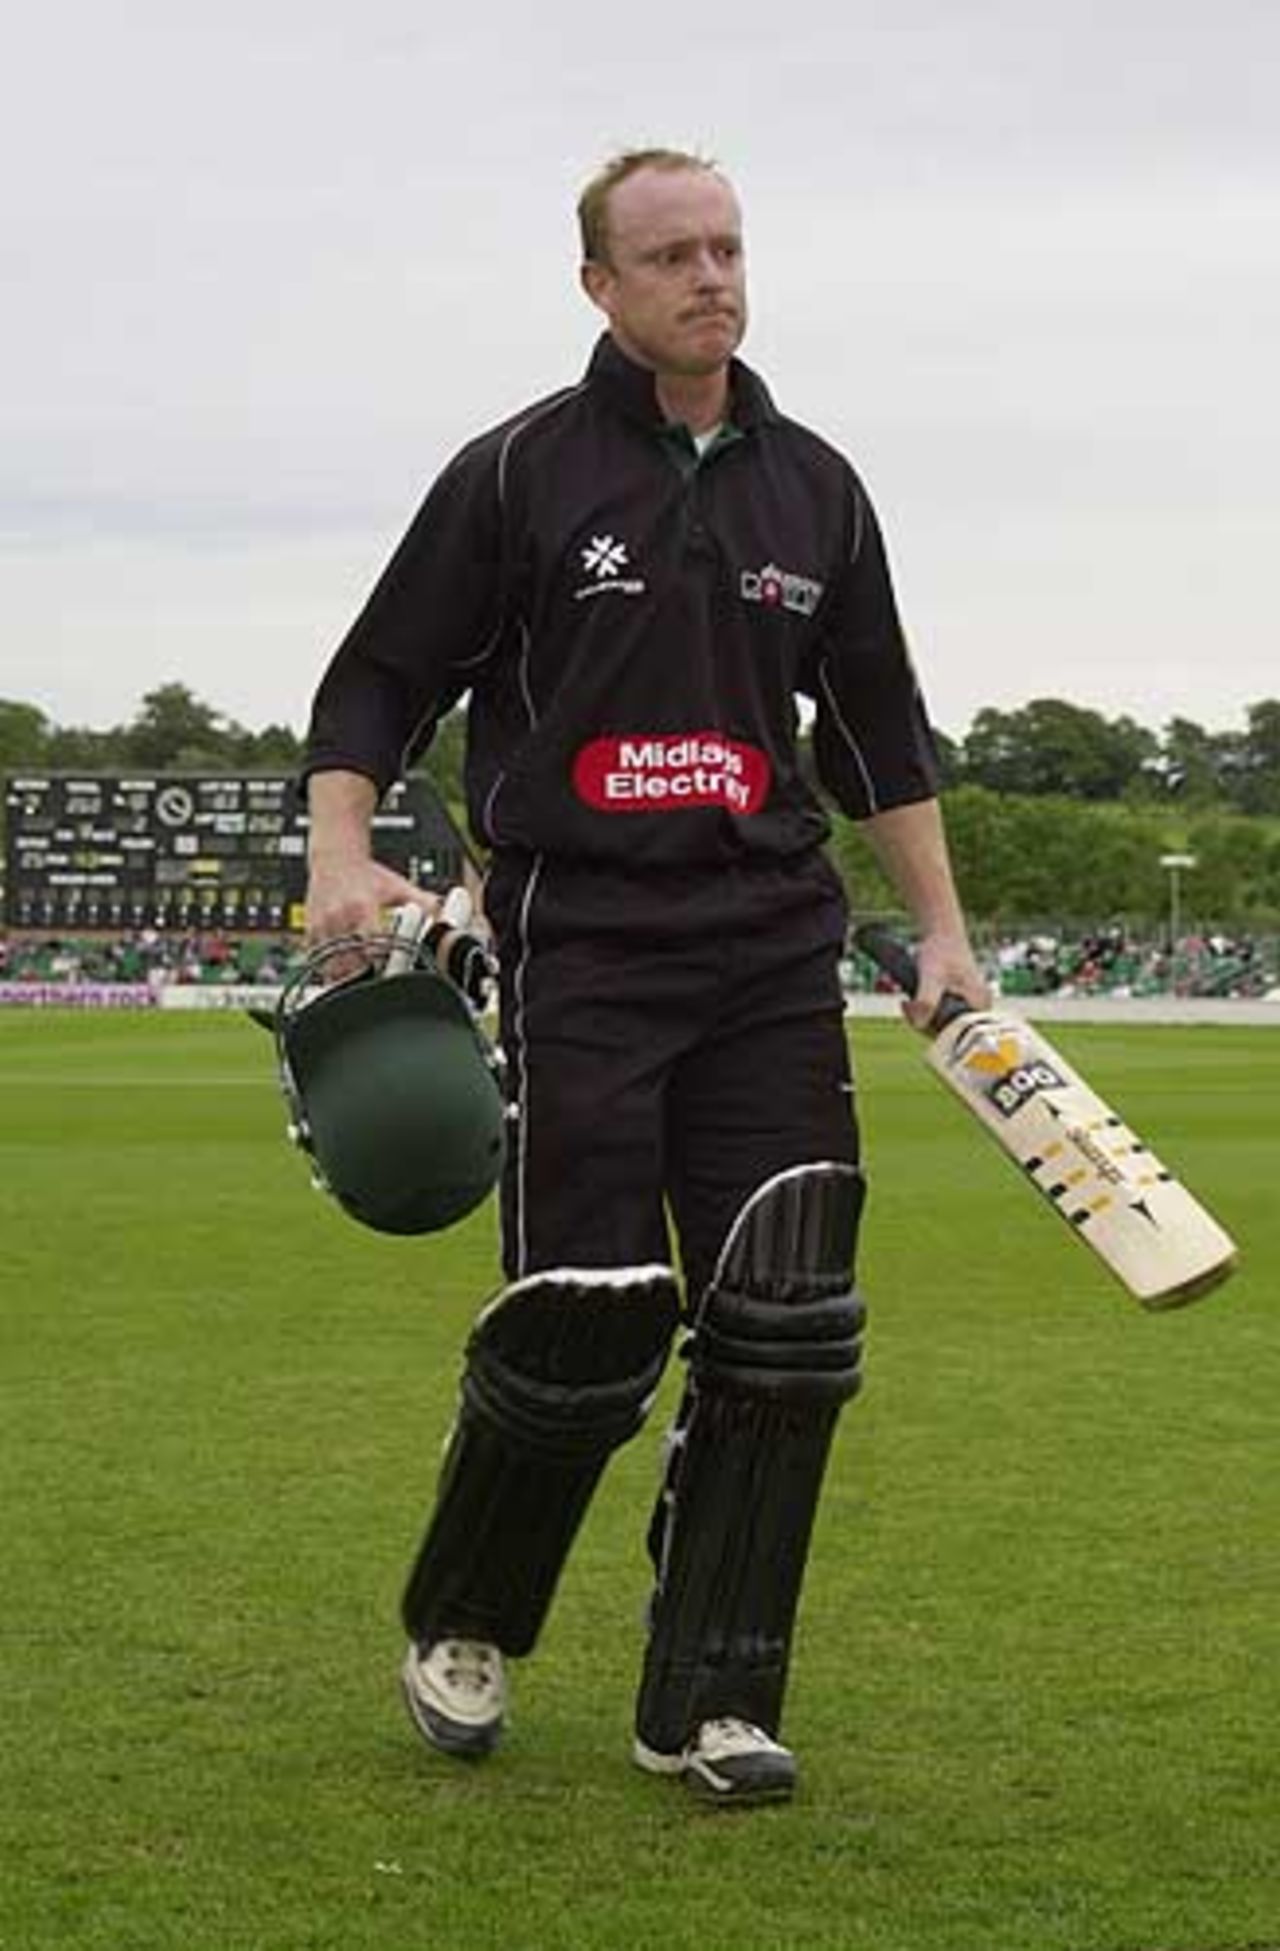 Ben Smith departs the field after his entertaining innings of 83, Durham v Worcs, NUL 16 Jun 2002